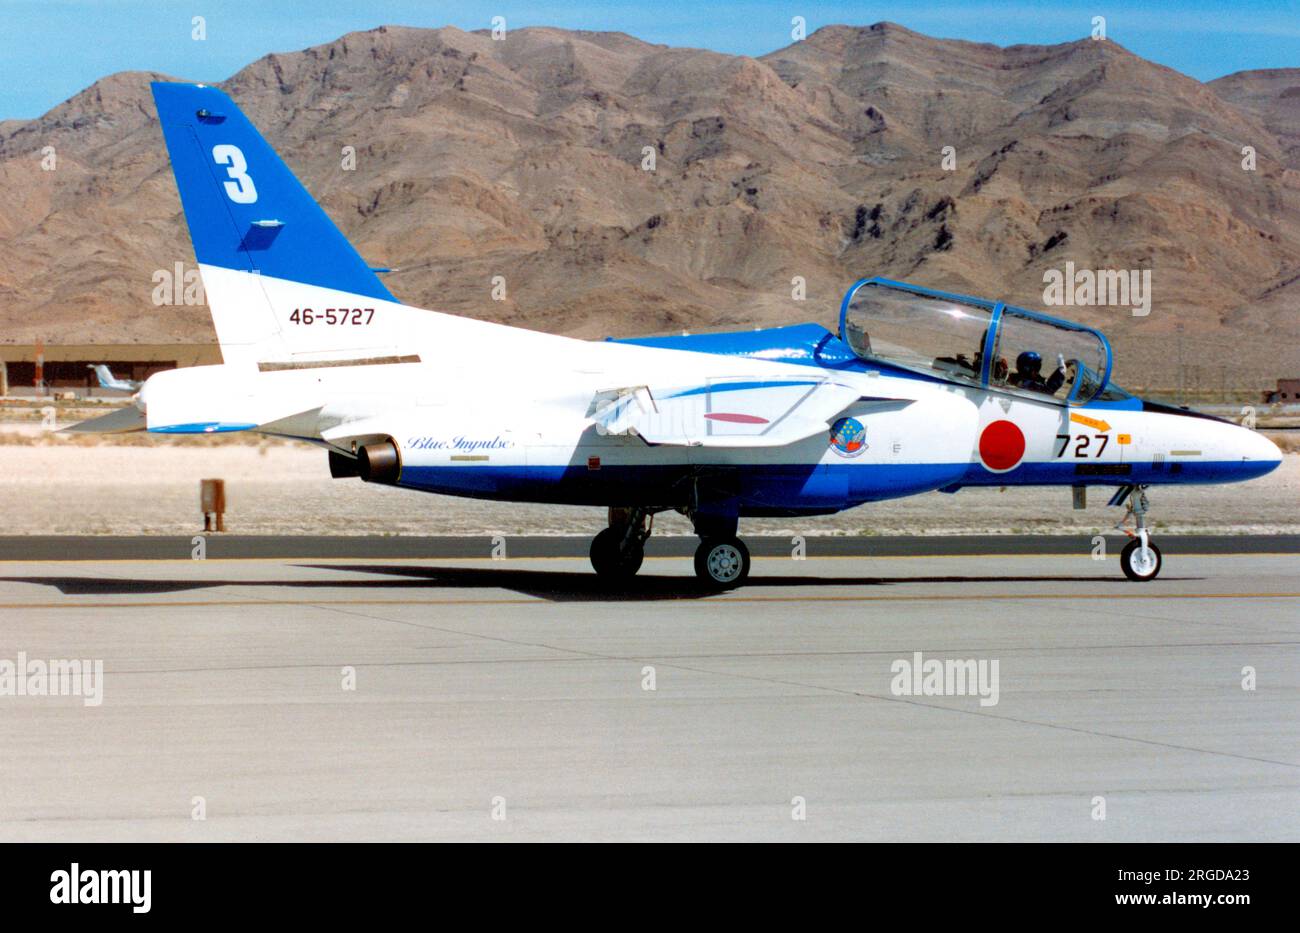 Japan Air Self Defence Force - Kawasaki T-4 46-5727 / number 3 (msn 1127), of the Blue Impulse aerobatic display team, at the Nellis Air Force Base '50th Anniversary of the USAF' airshow on 26 April 1997. Stock Photo